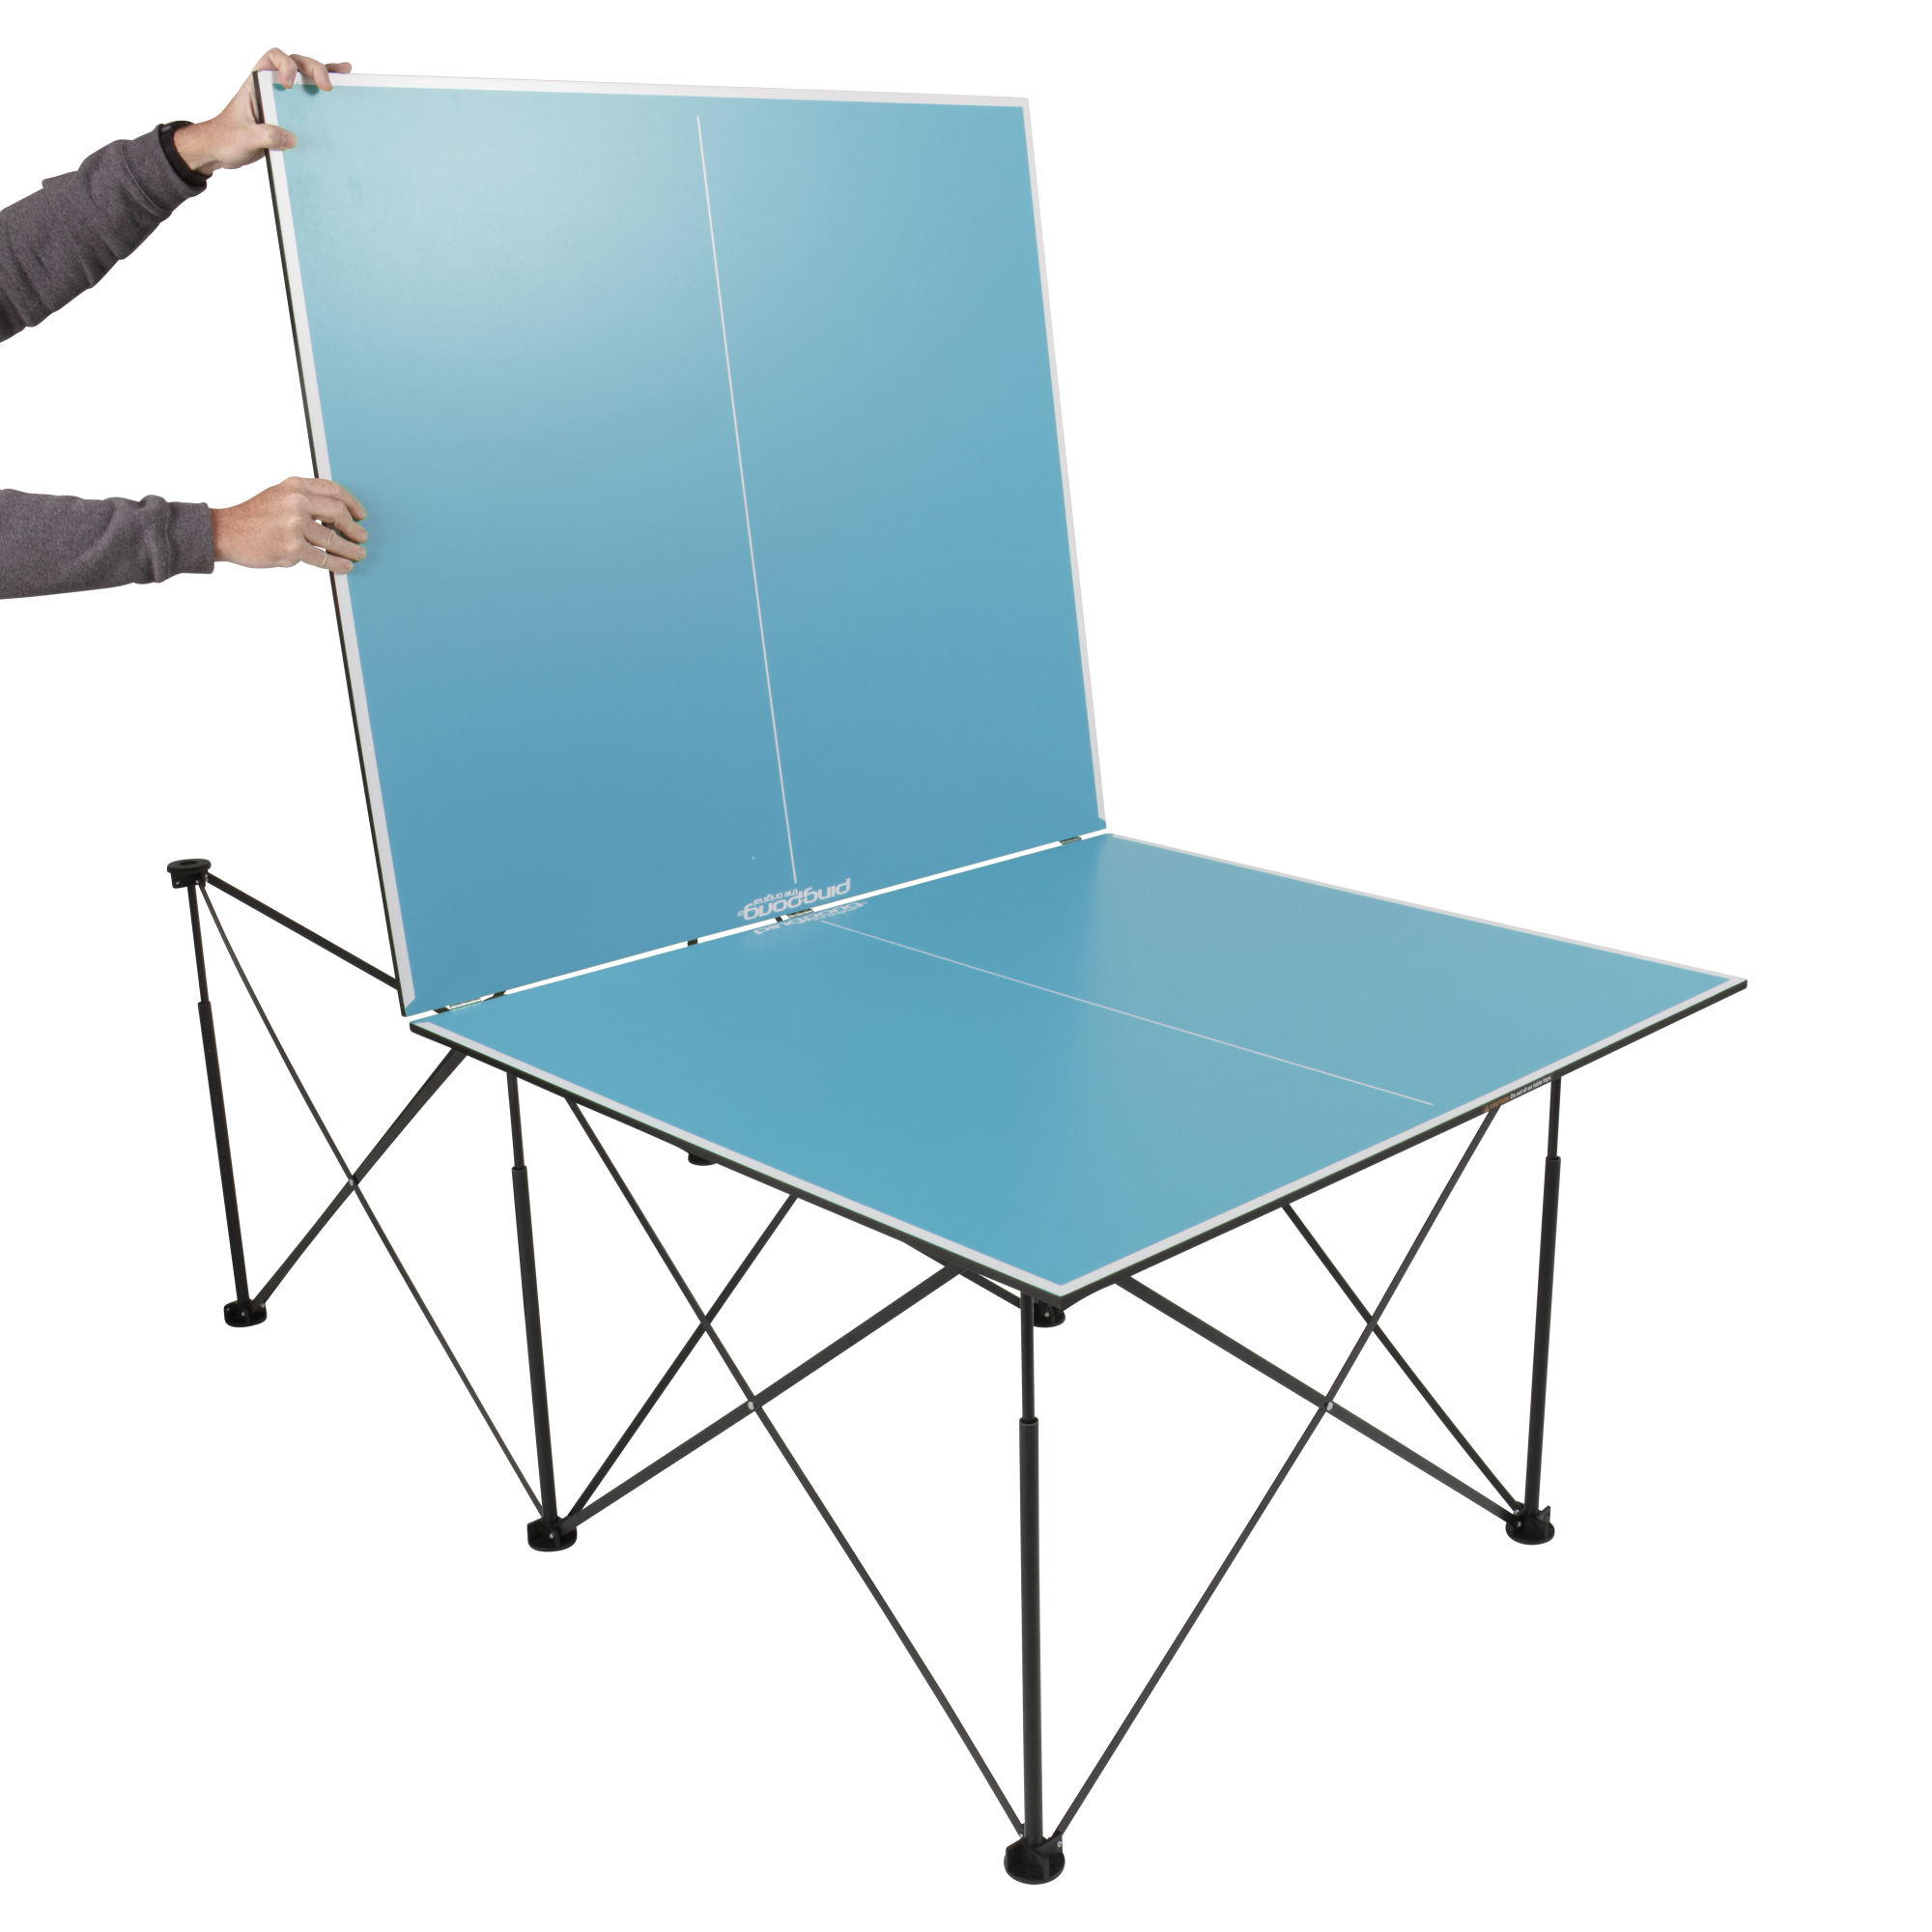 Ping-Pong 7' Instant Play Pop-Up Compact Table Tennis Table with No Tools or Assembly Required - Blue - image 6 of 14